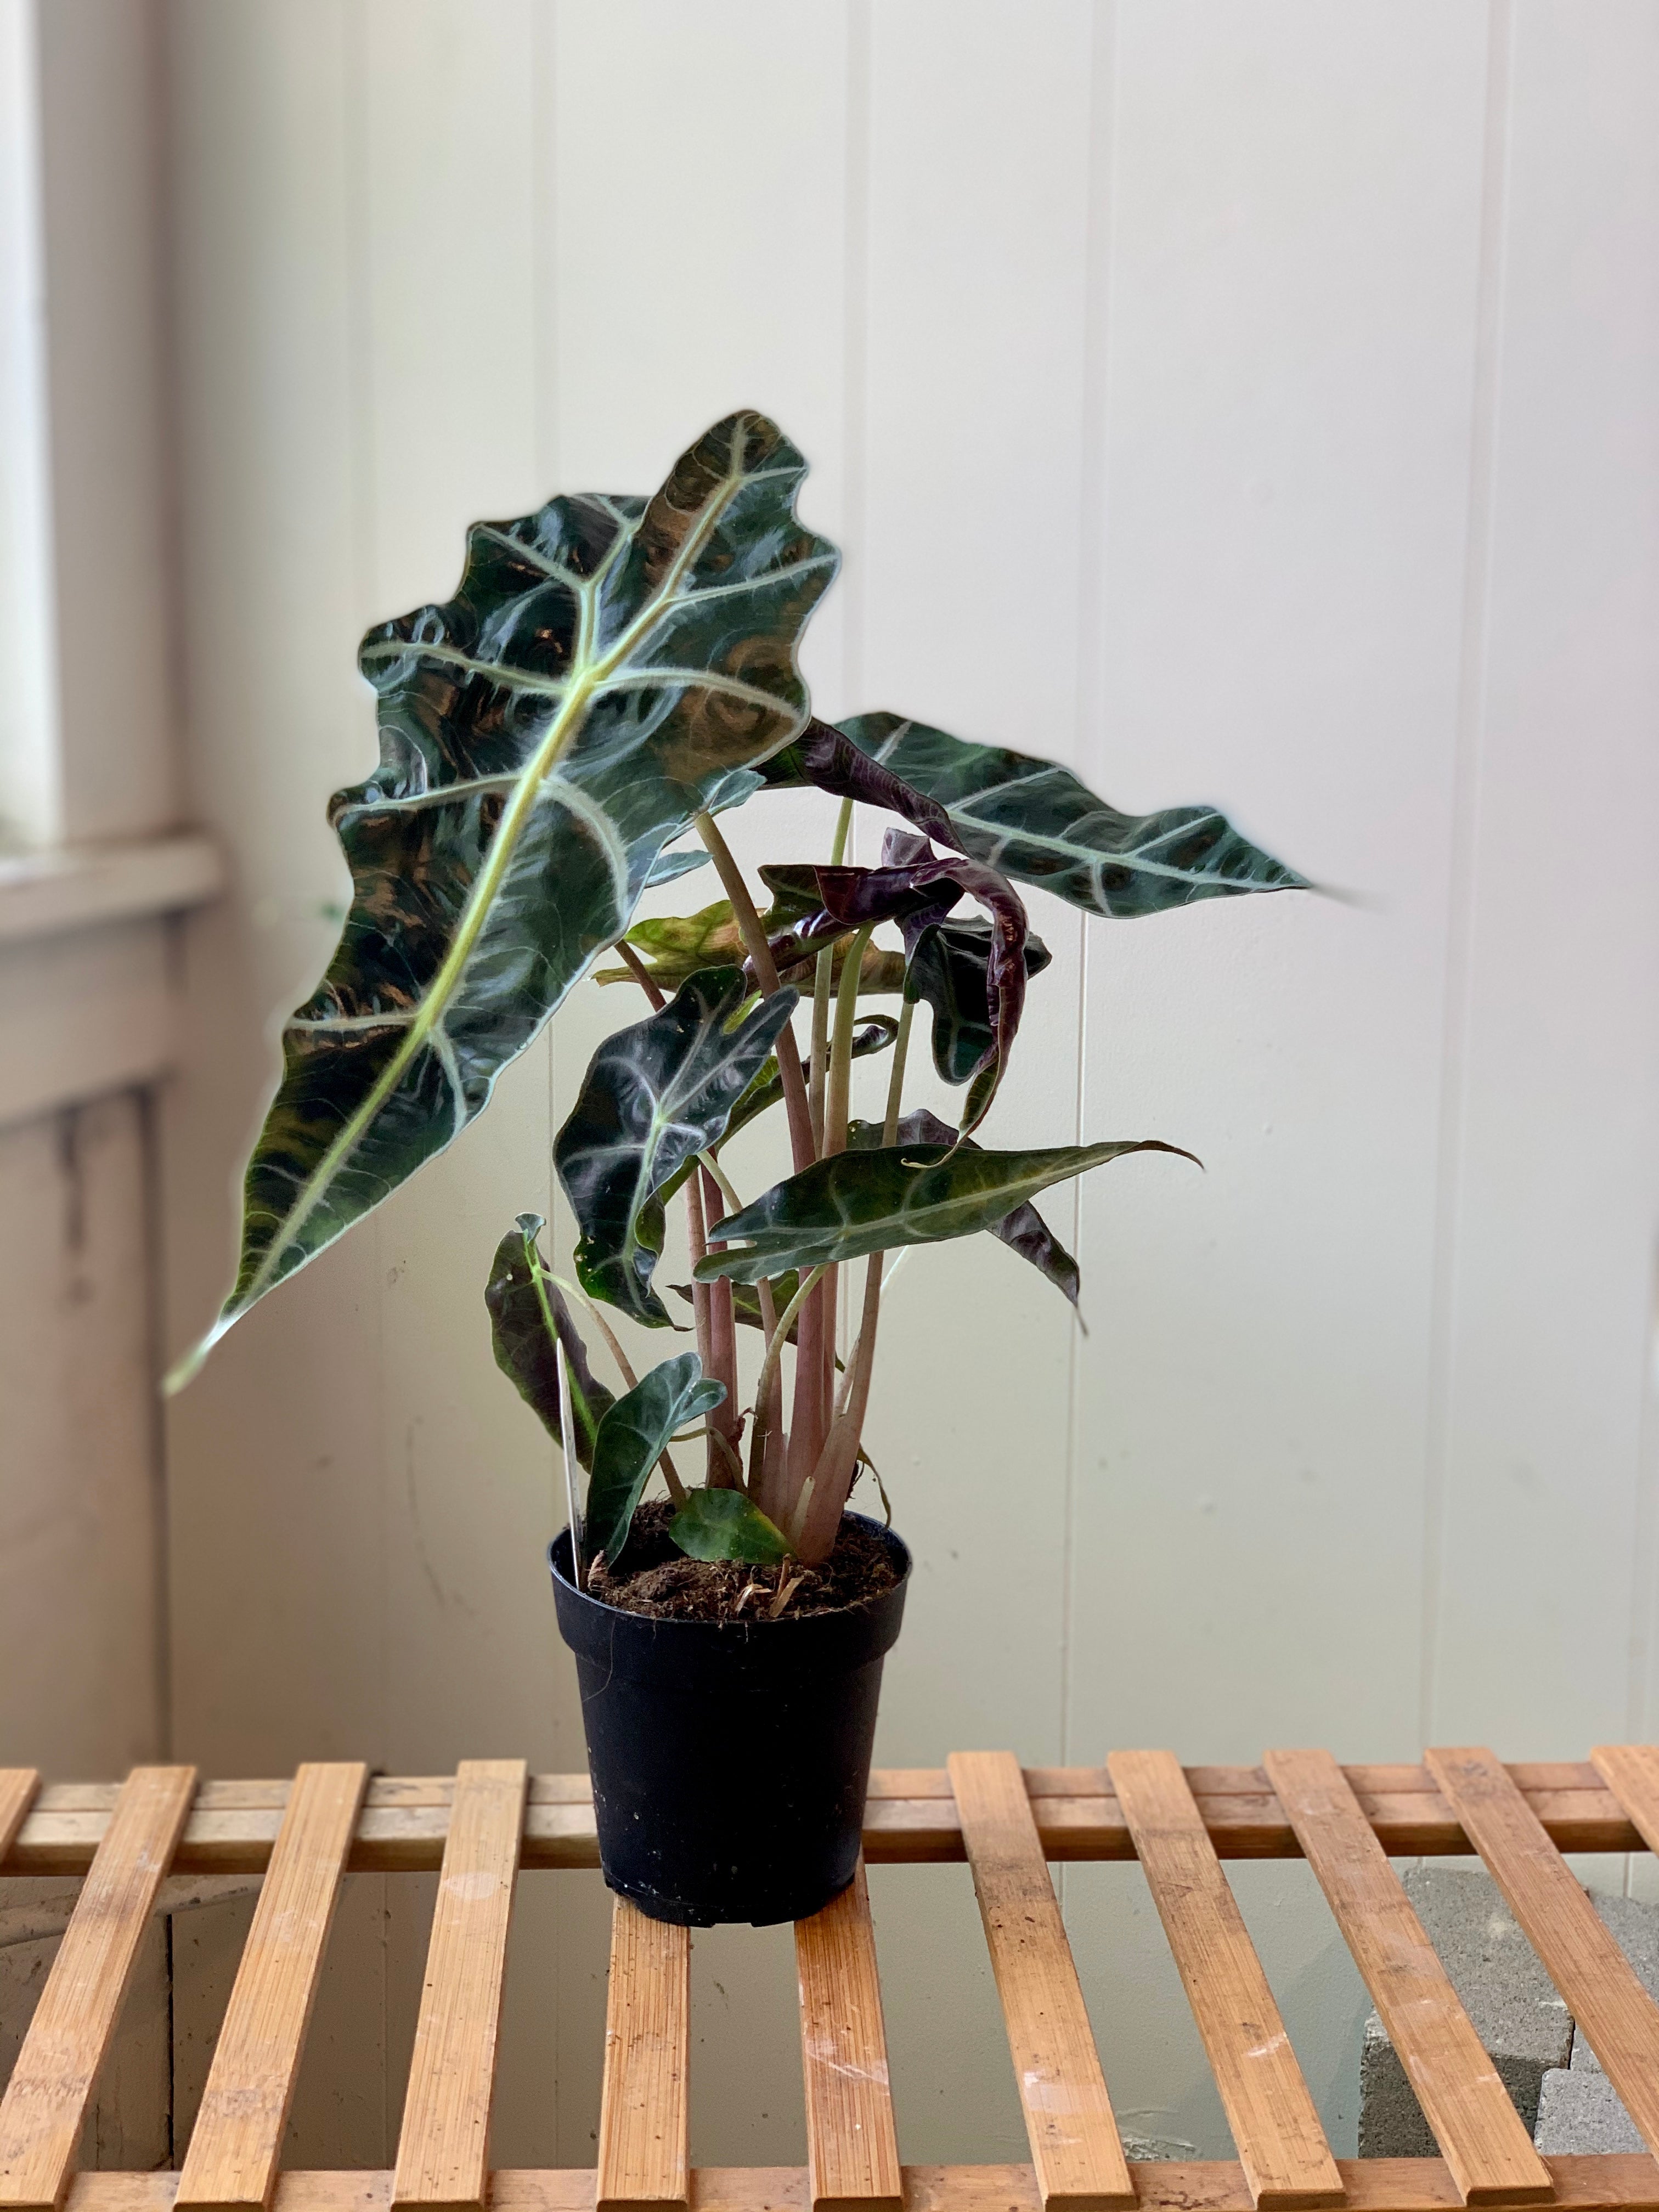 Alocasia - African Mask